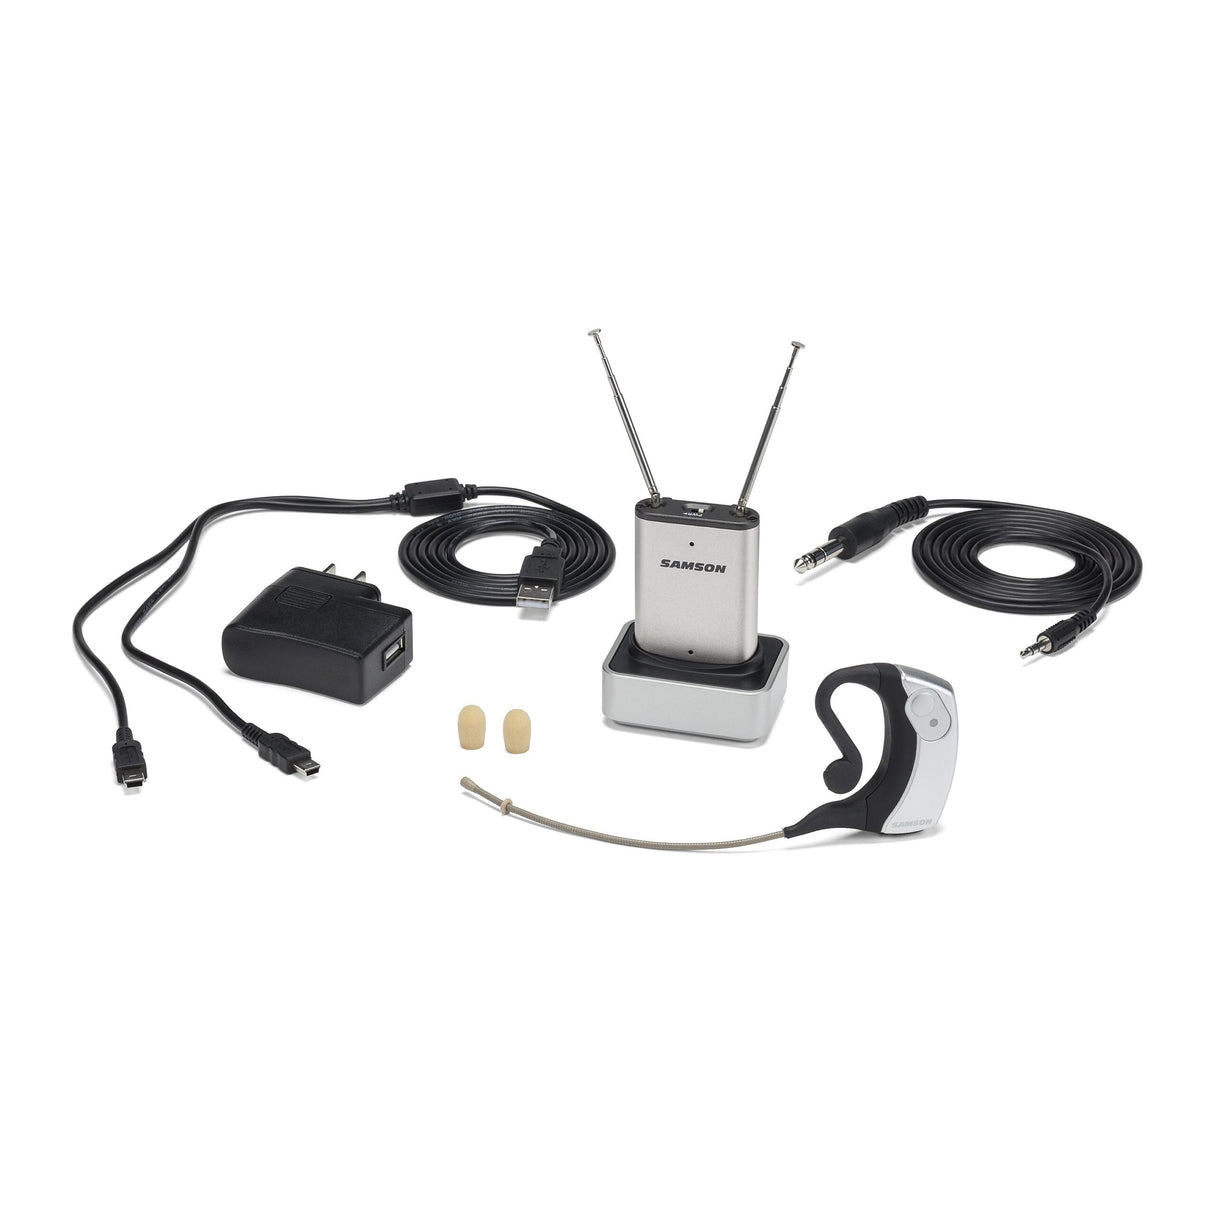 Samson AirLine Micro Earset System, K6 Band